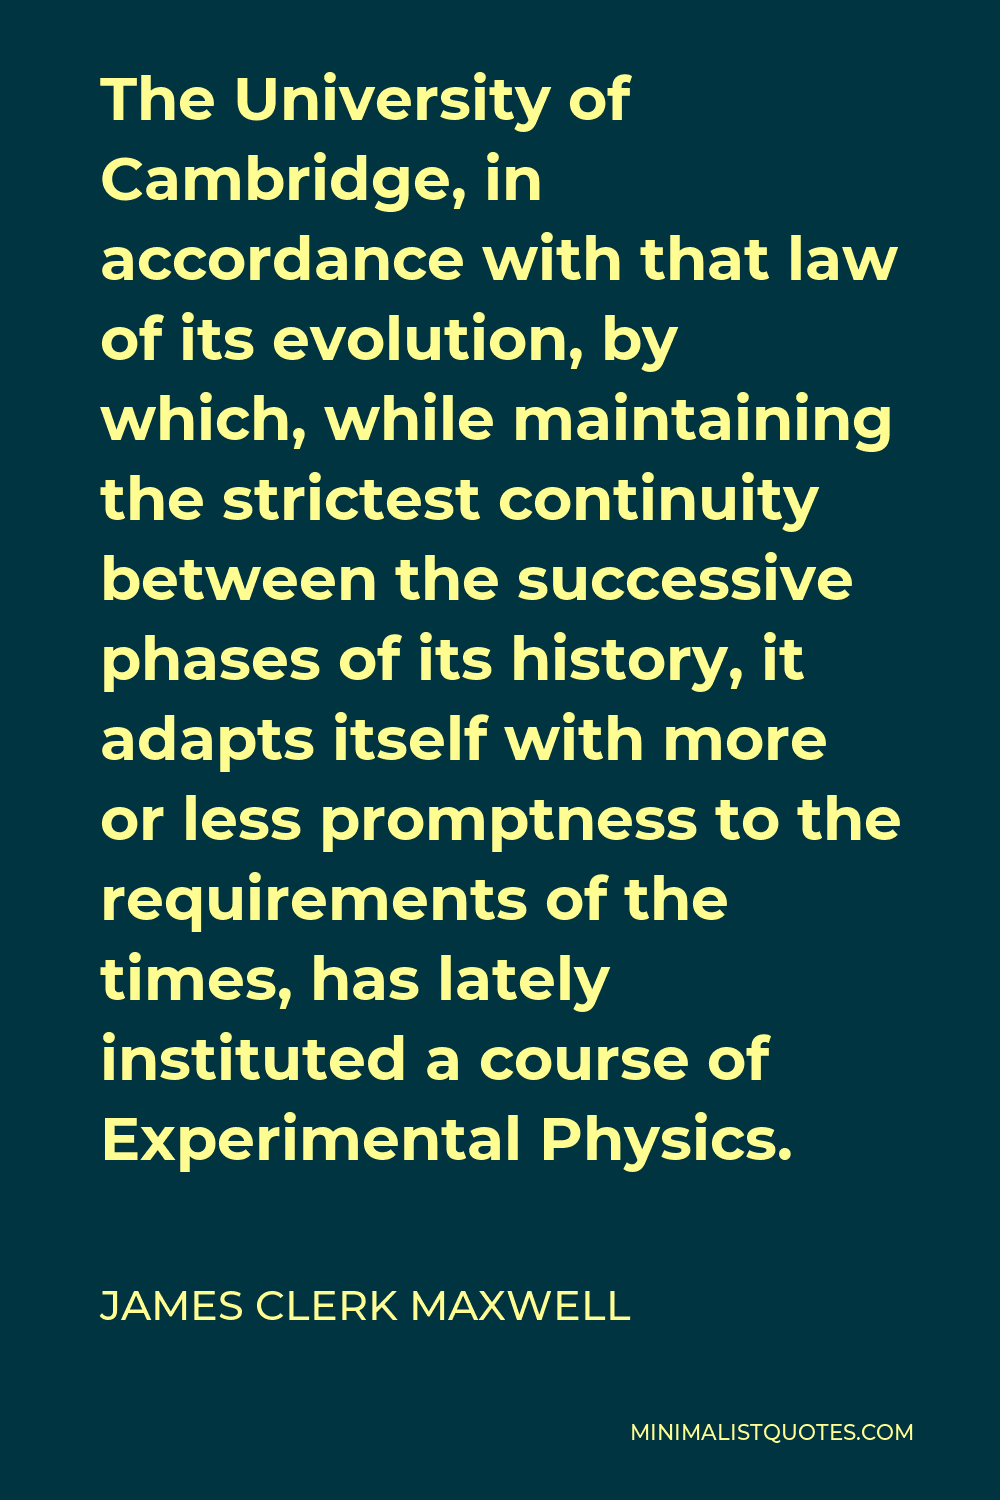 James Clerk Maxwell Quote - The University of Cambridge, in accordance with that law of its evolution, by which, while maintaining the strictest continuity between the successive phases of its history, it adapts itself with more or less promptness to the requirements of the times, has lately instituted a course of Experimental Physics.